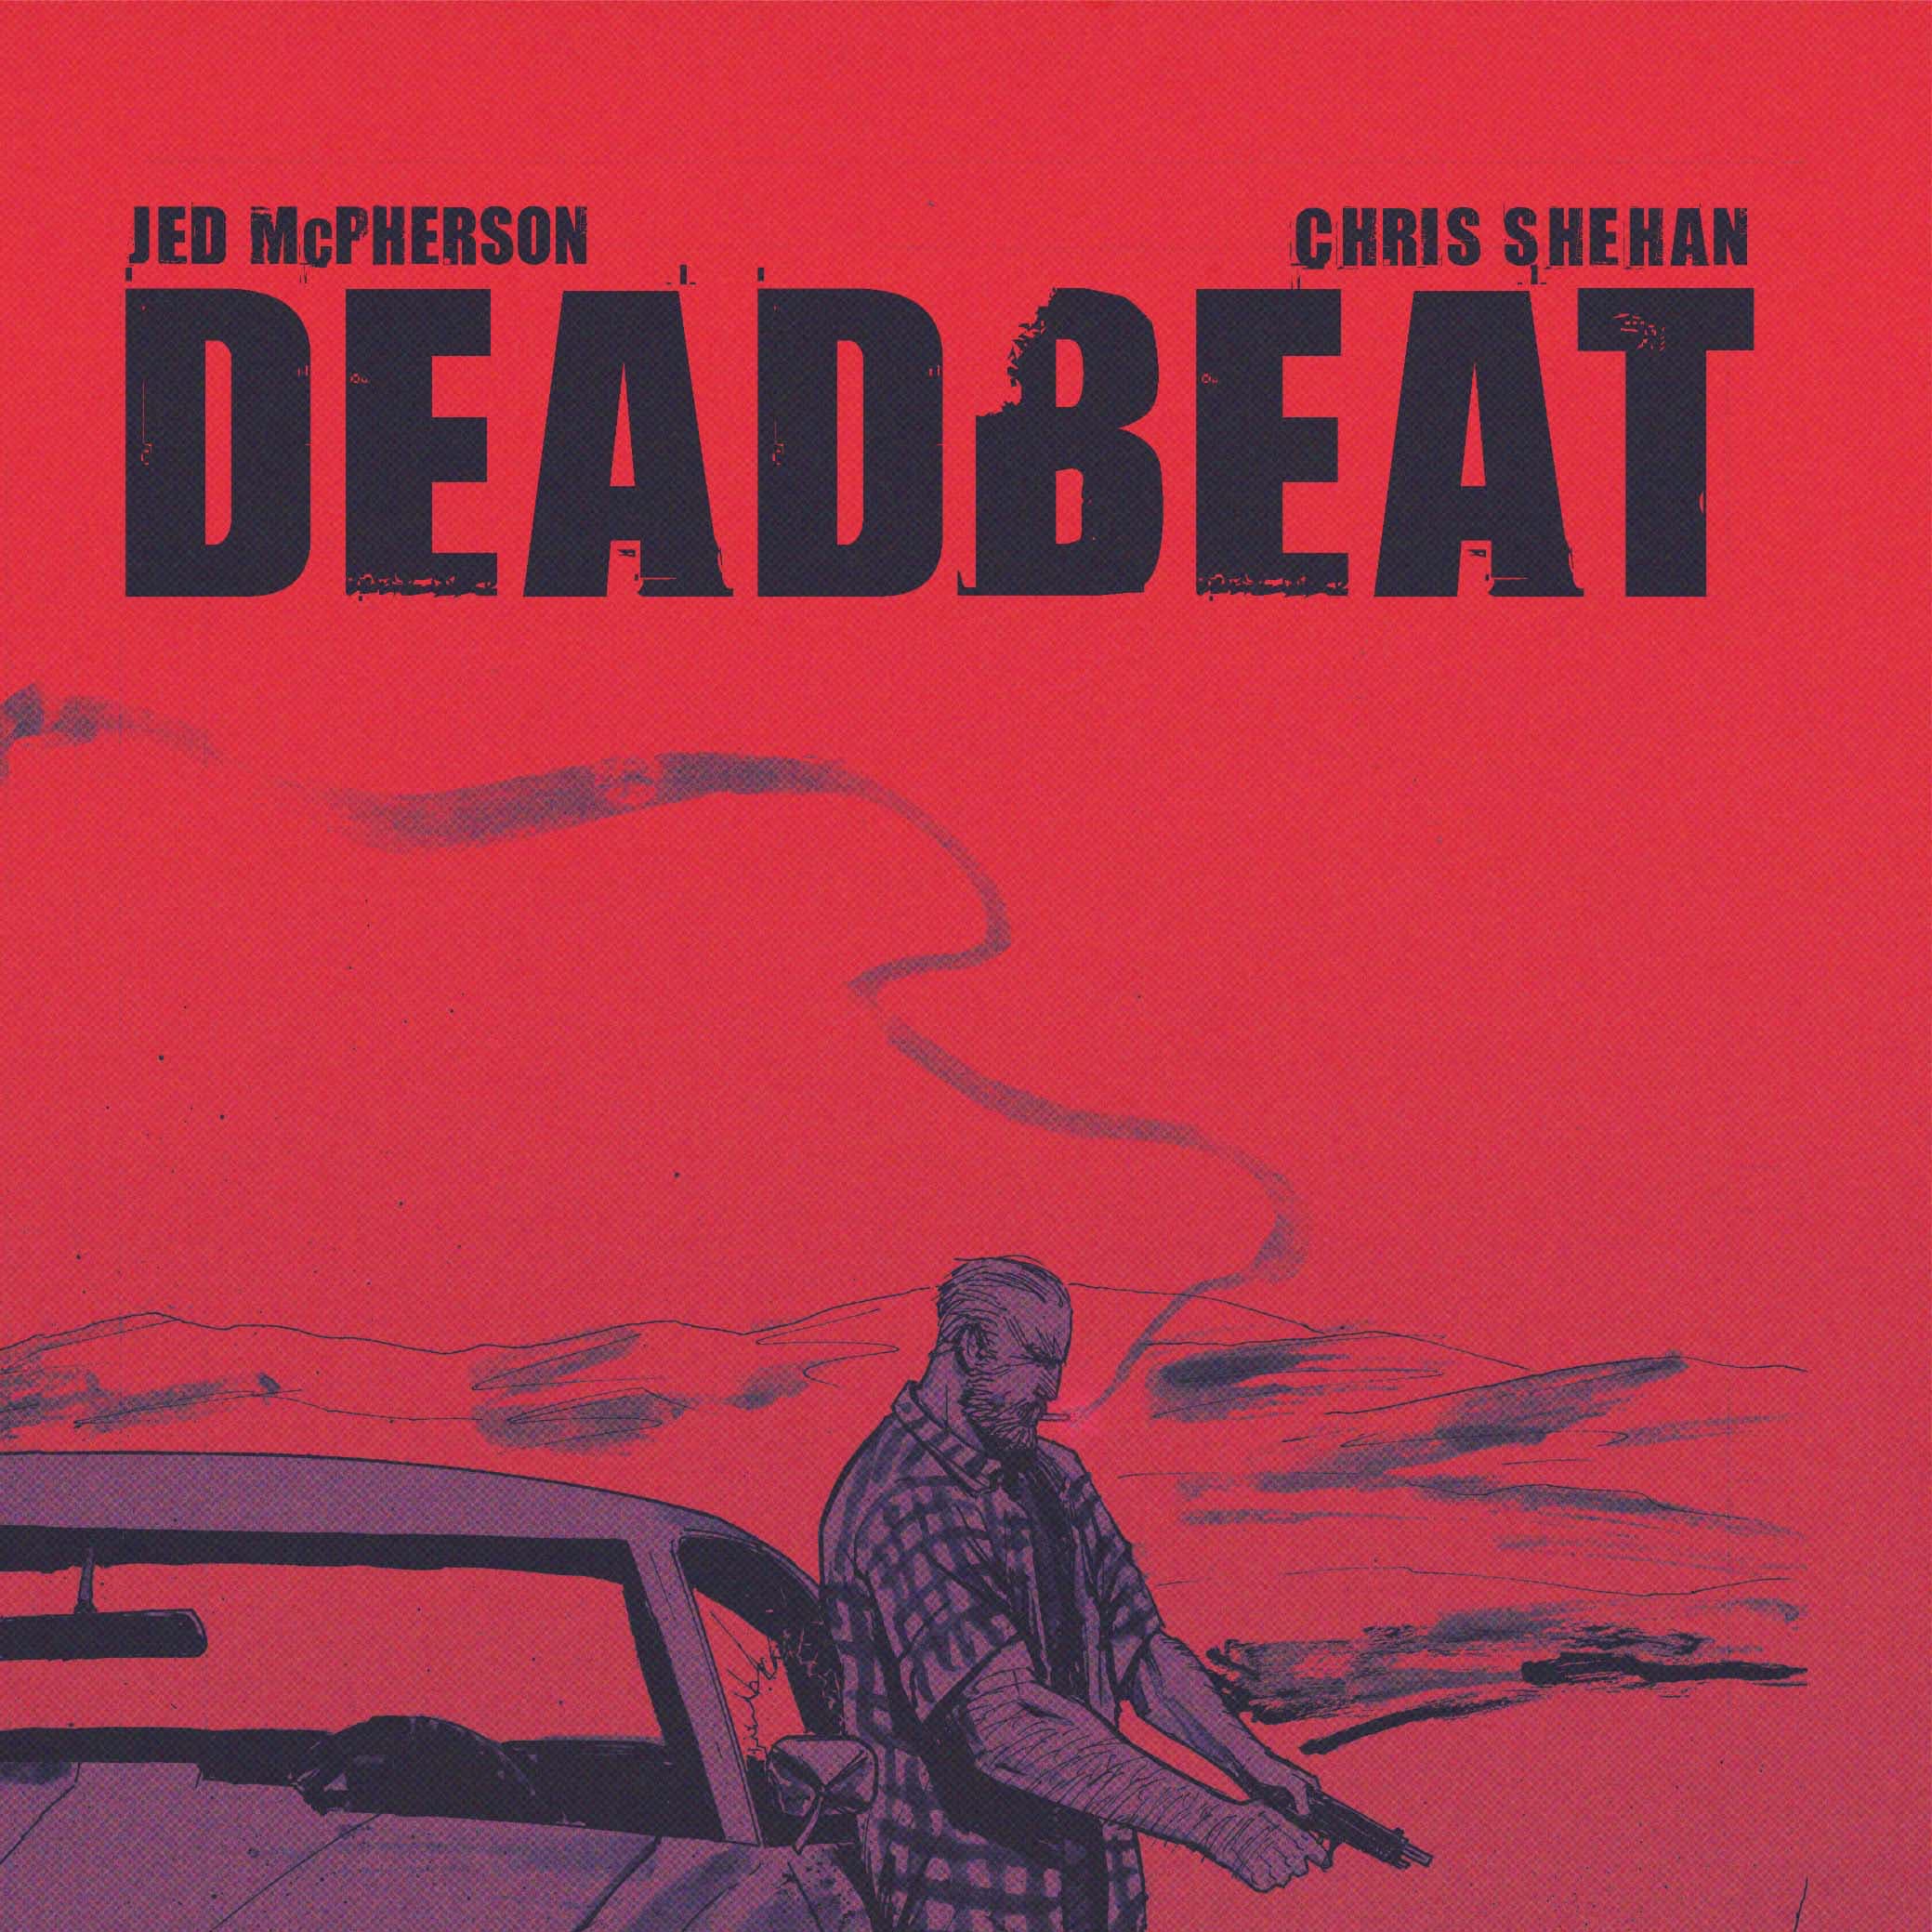 Deadbeat cover showing a man leaning against a muscle car holding a gun.